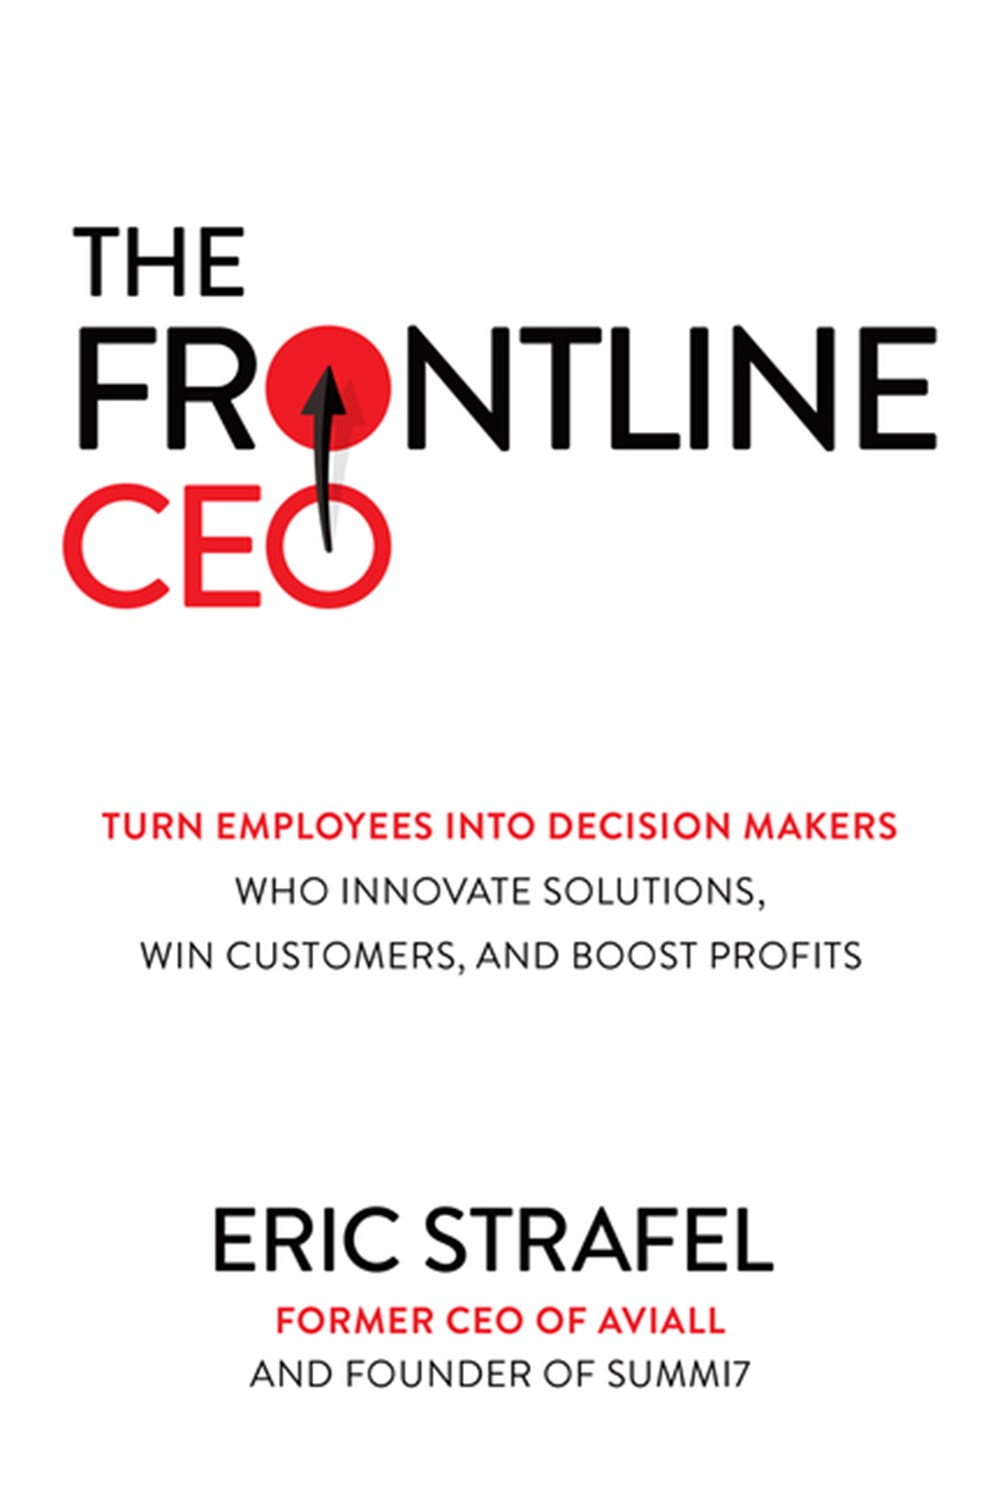 Frontline Ceo Turn Employees Into Decision Makers Who Innovate Solutions, Win Customers, and Boost P